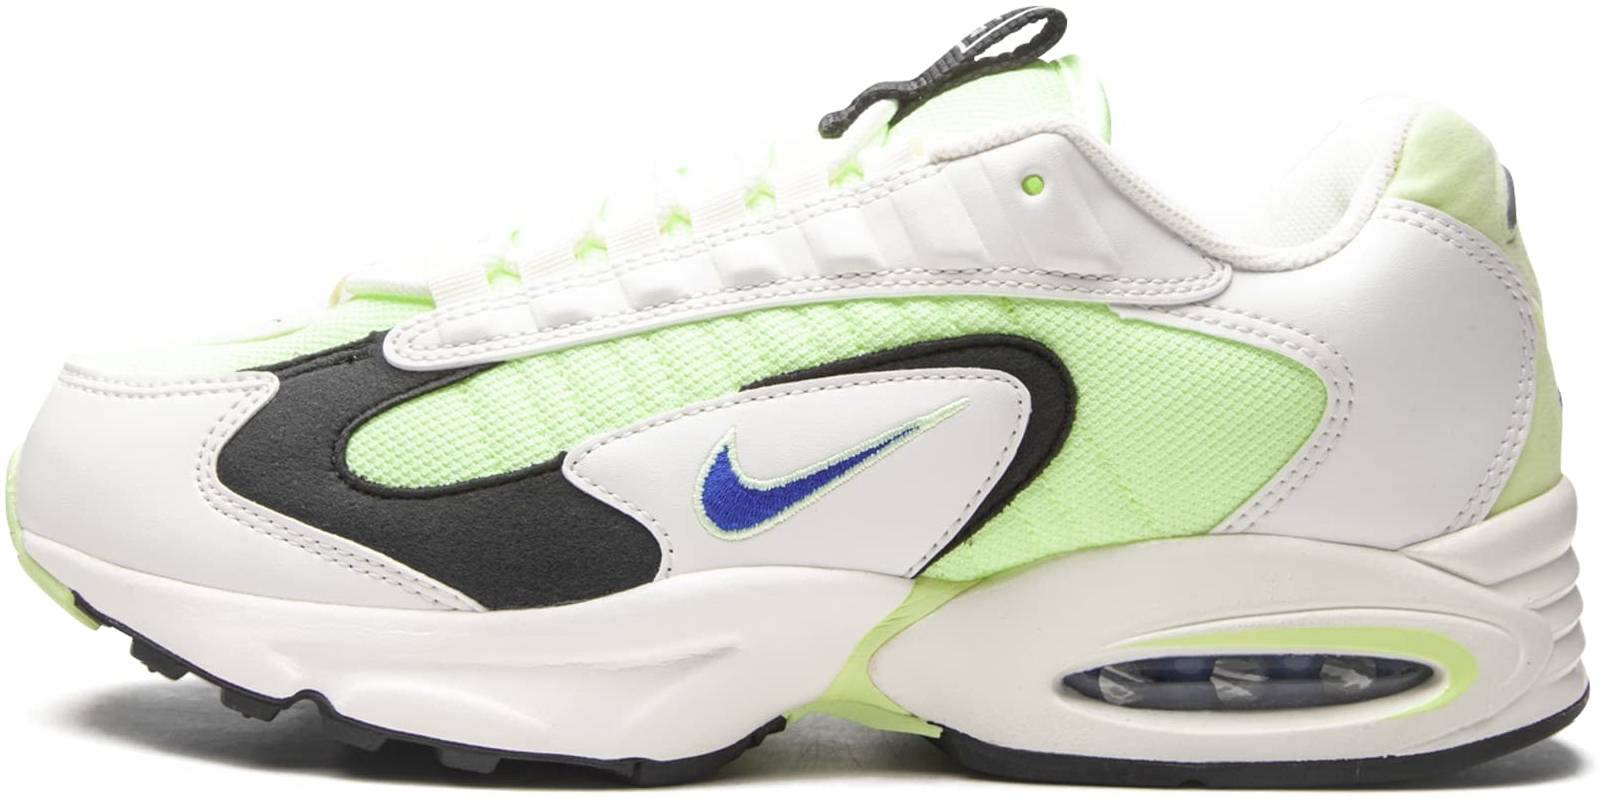 Nike Air Max Triax 96 sneakers in 5 colors (only $79) | RunRepeat